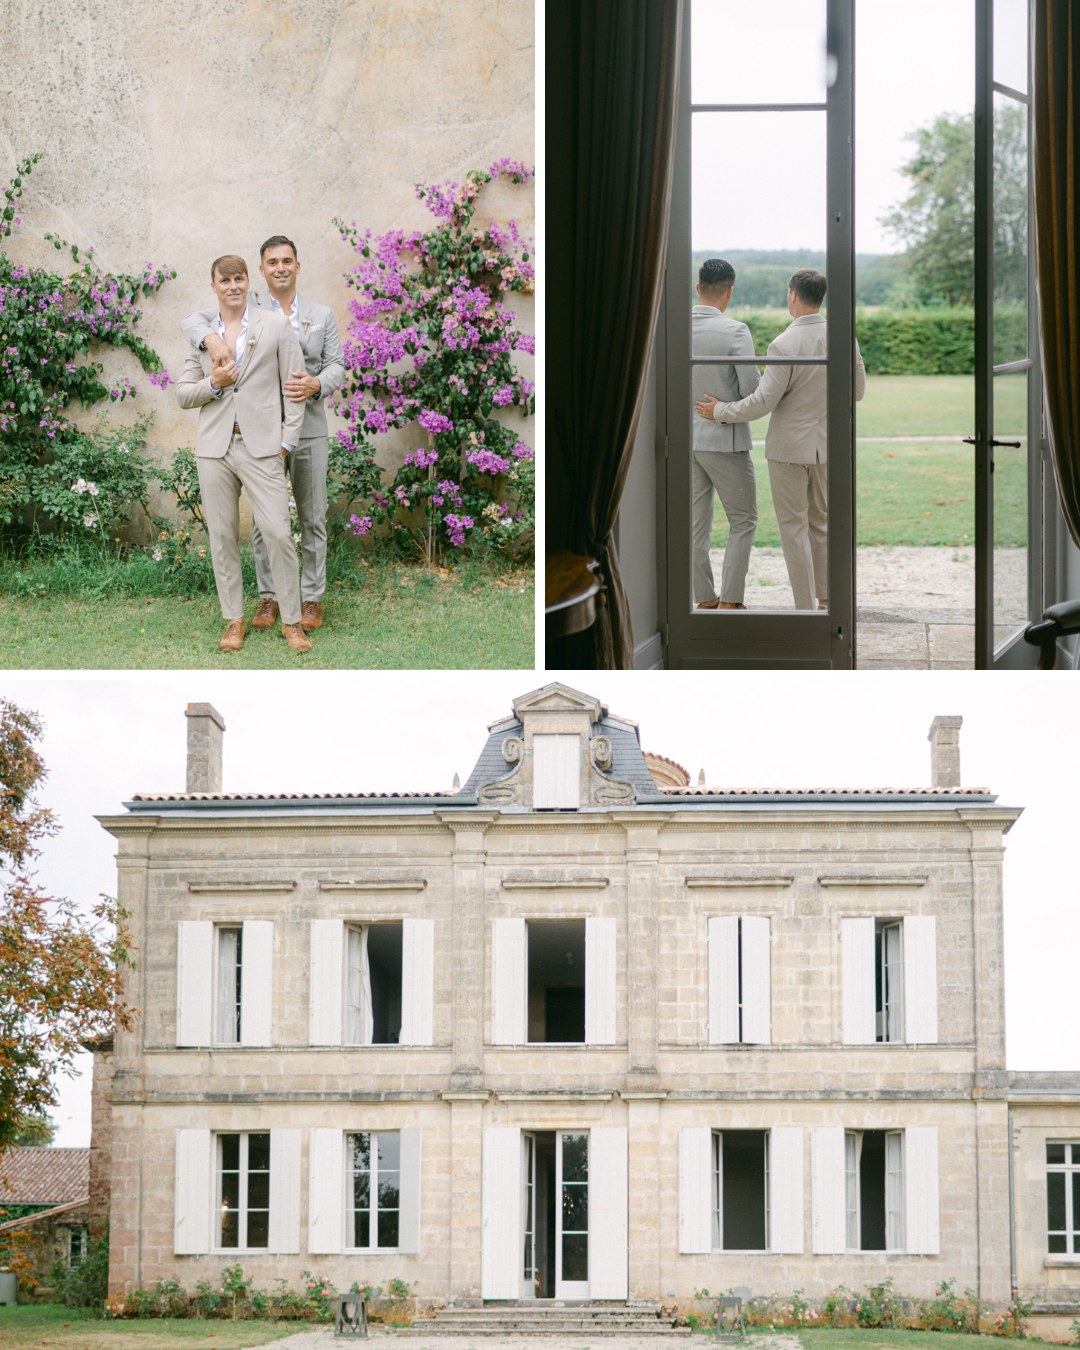 Top left: Two people in suits stand in front of a flowering bush, smiling and making celebratory gestures. Top right: The same two people stand side by side, looking out through large glass doors towards a green landscape. Bottom: A large, rustic building with numerous windows and shutters.